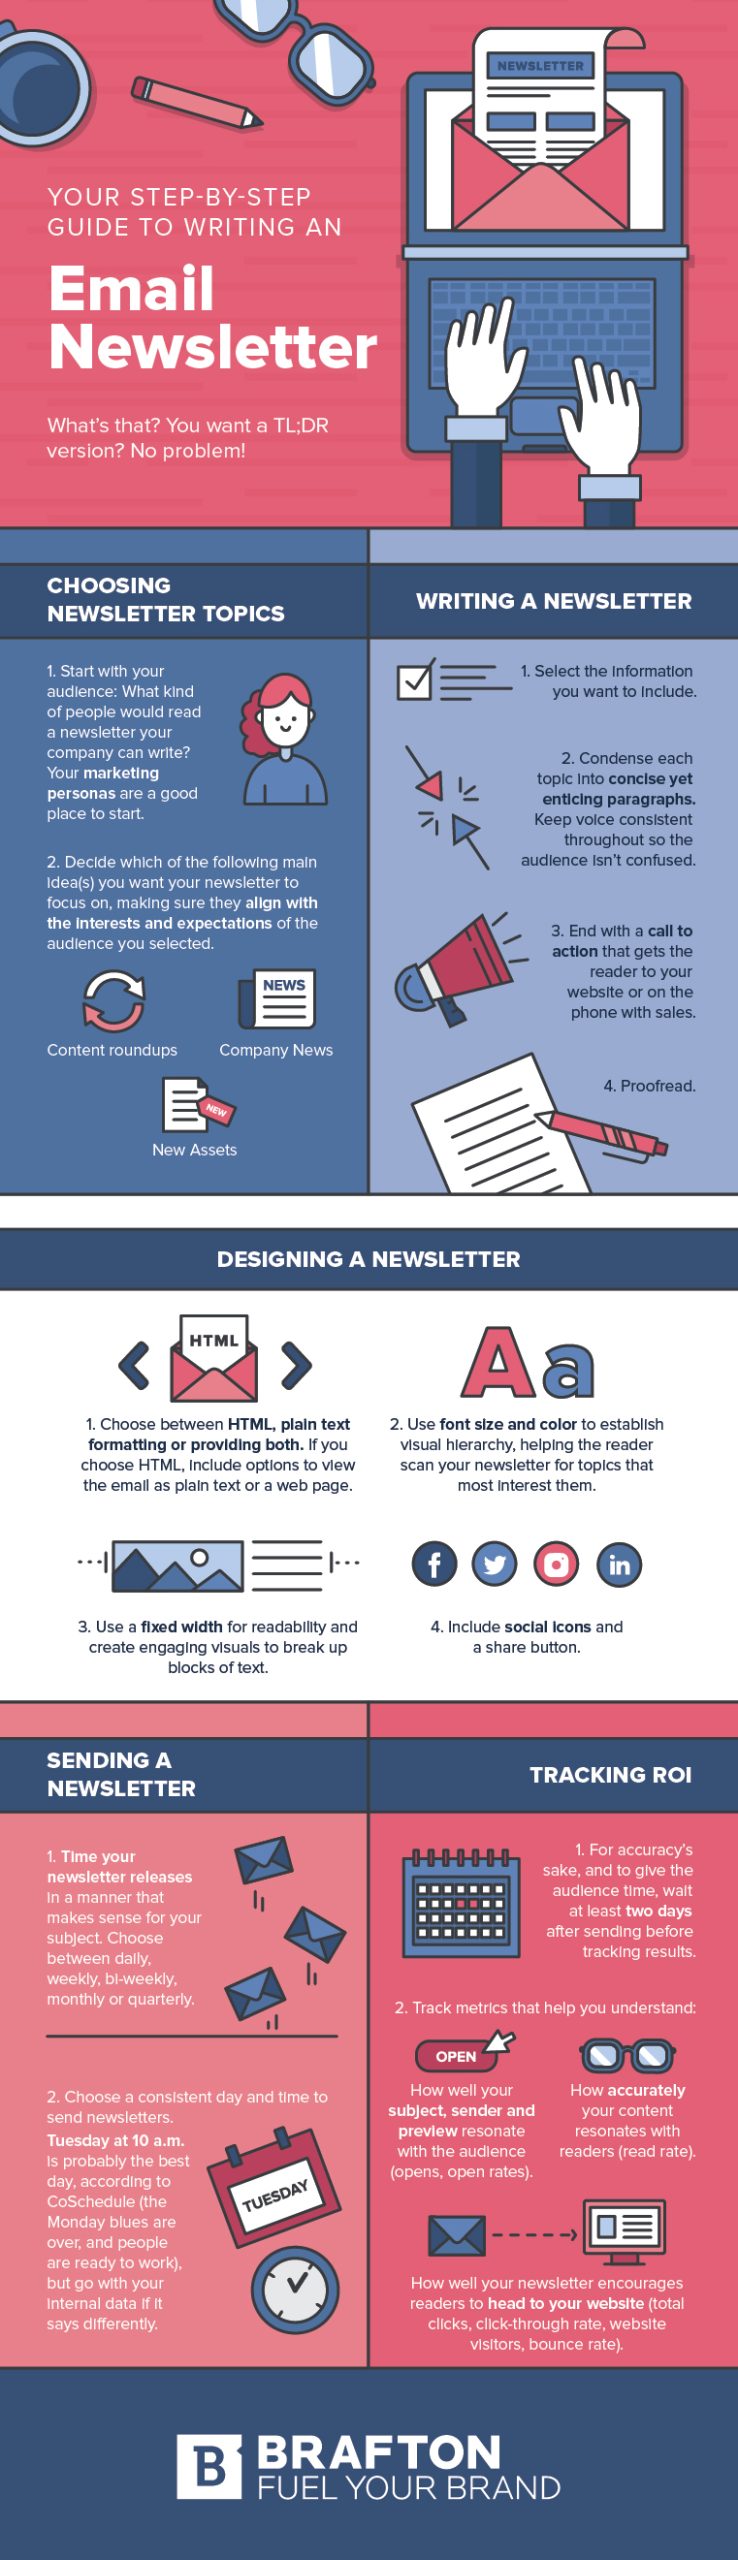 How to write a newsletter Brafton email newsletter